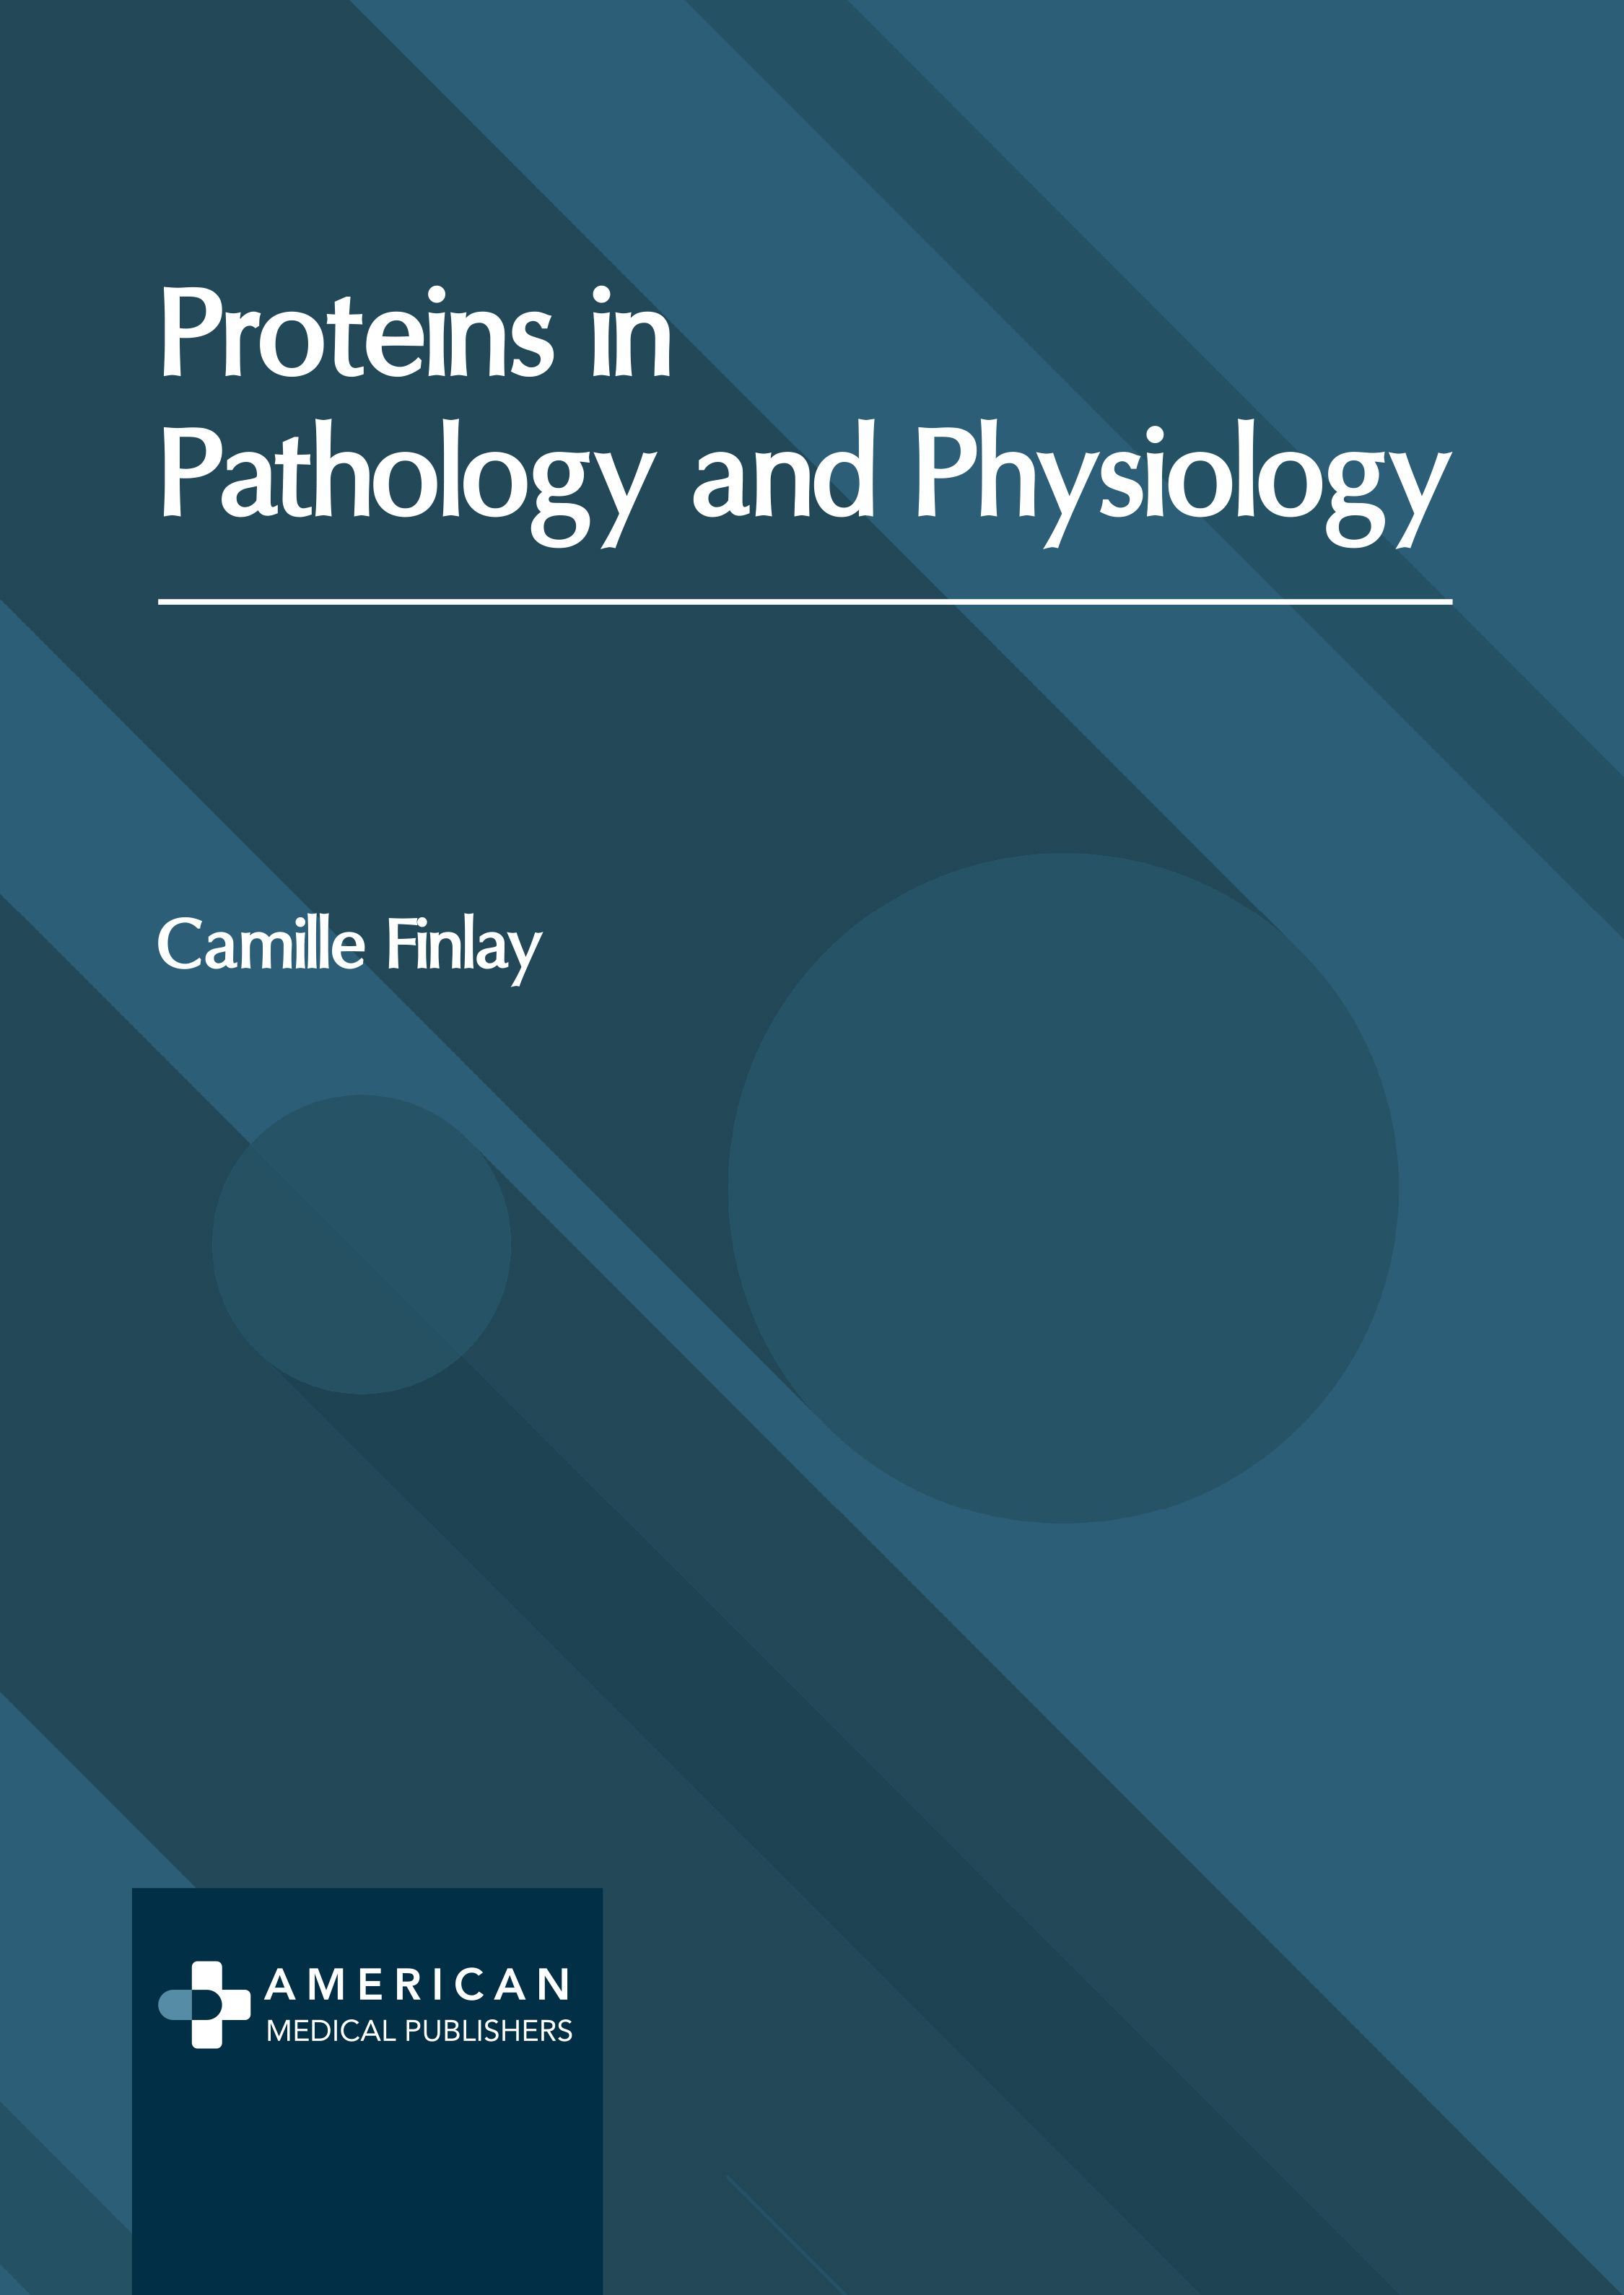 PROTEINS IN PATHOLOGY AND PHYSIOLOGY